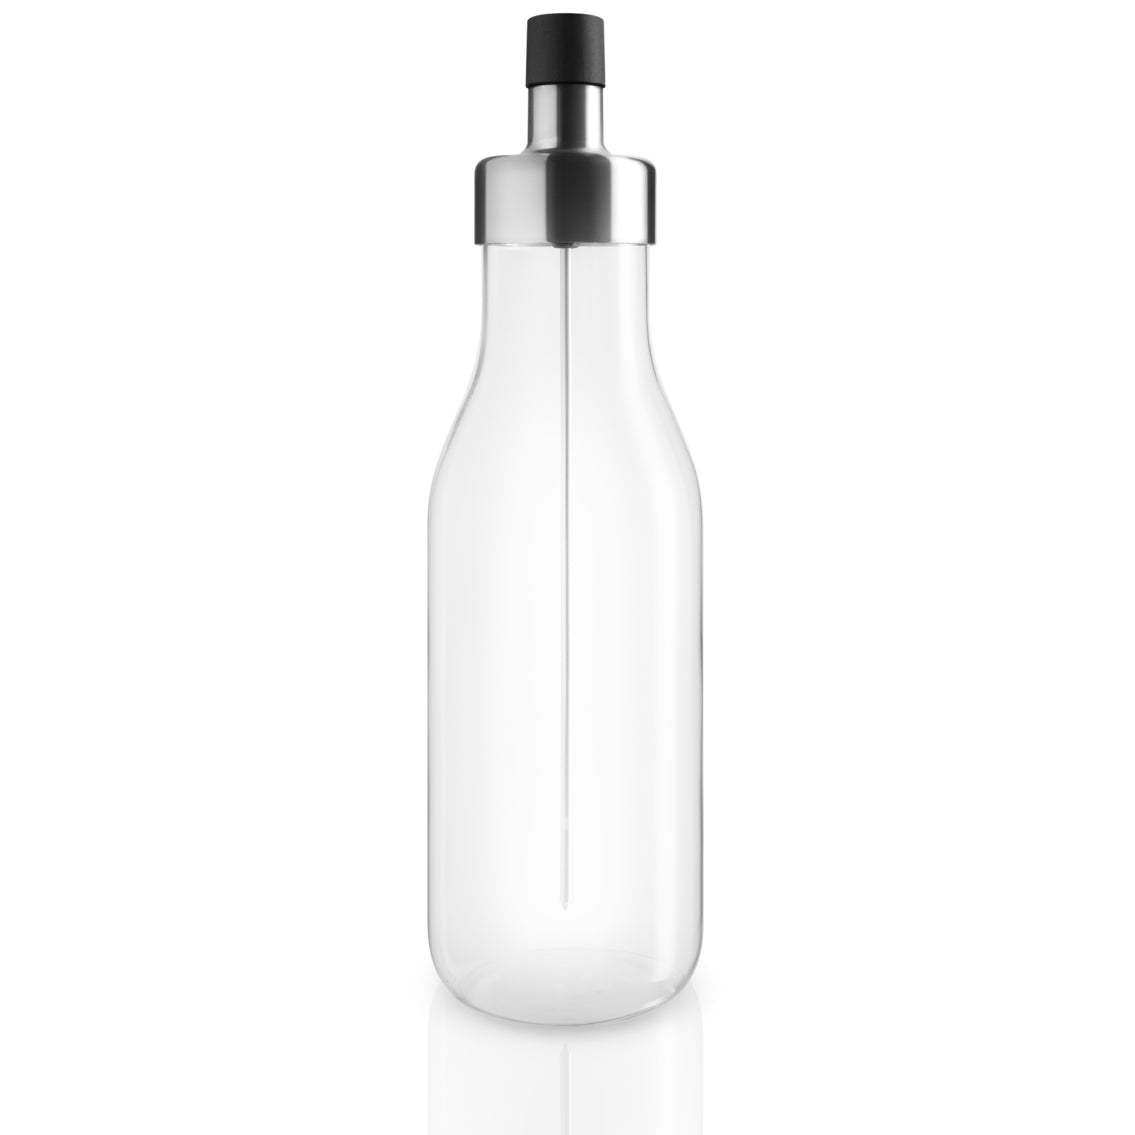 Myflavour Oil Carafe 0.5 L